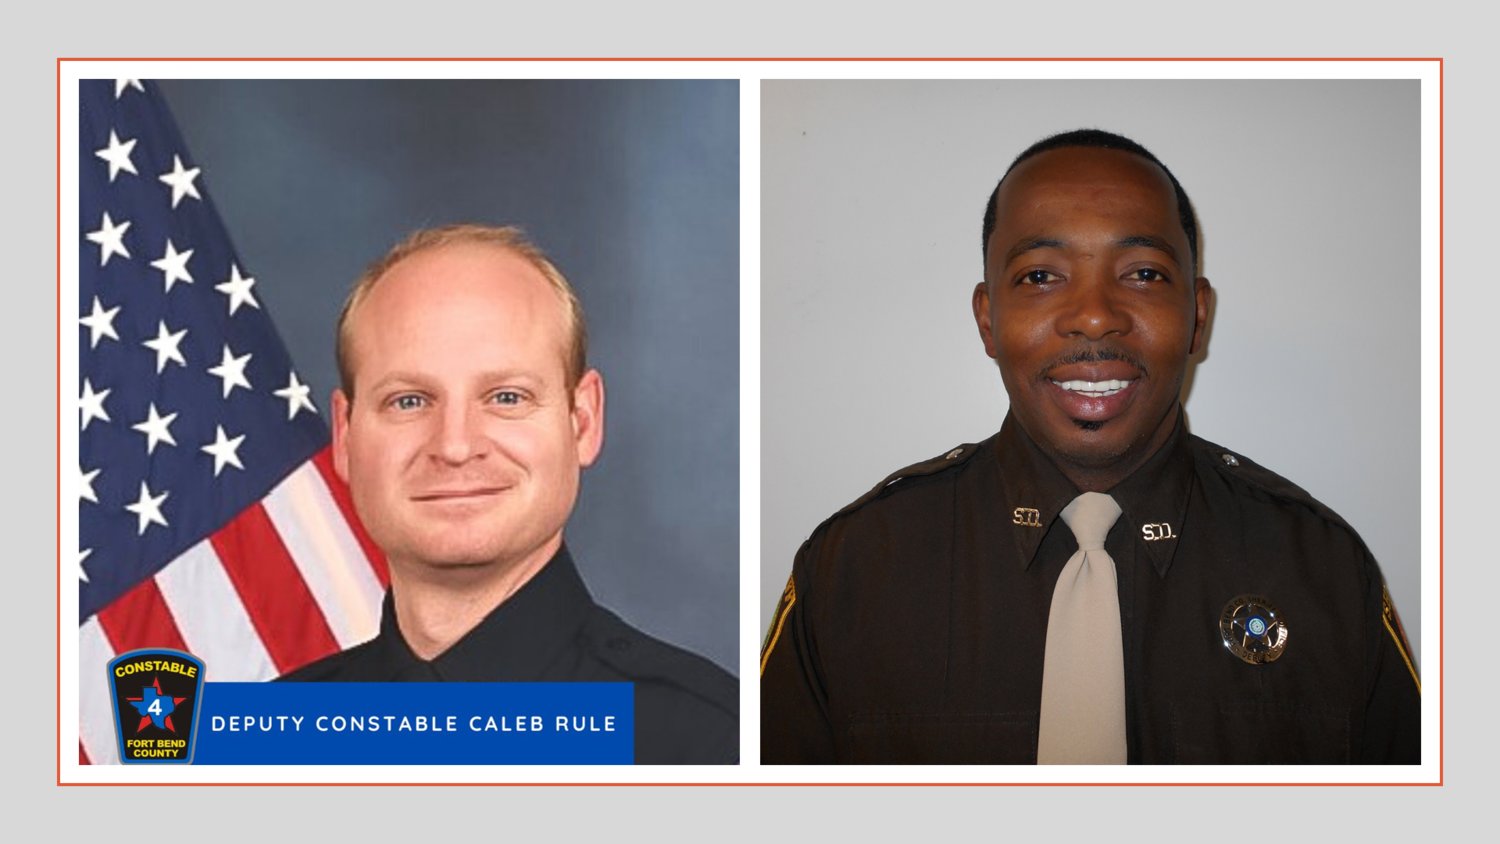 Chackwick McRae (right) has been indicted on the charge of Criminally Negligent Homicide in connection with the May 29 shooting death of Fort Bend County Constable’s Deputy for Precinct 4 Caleb Rule (left).